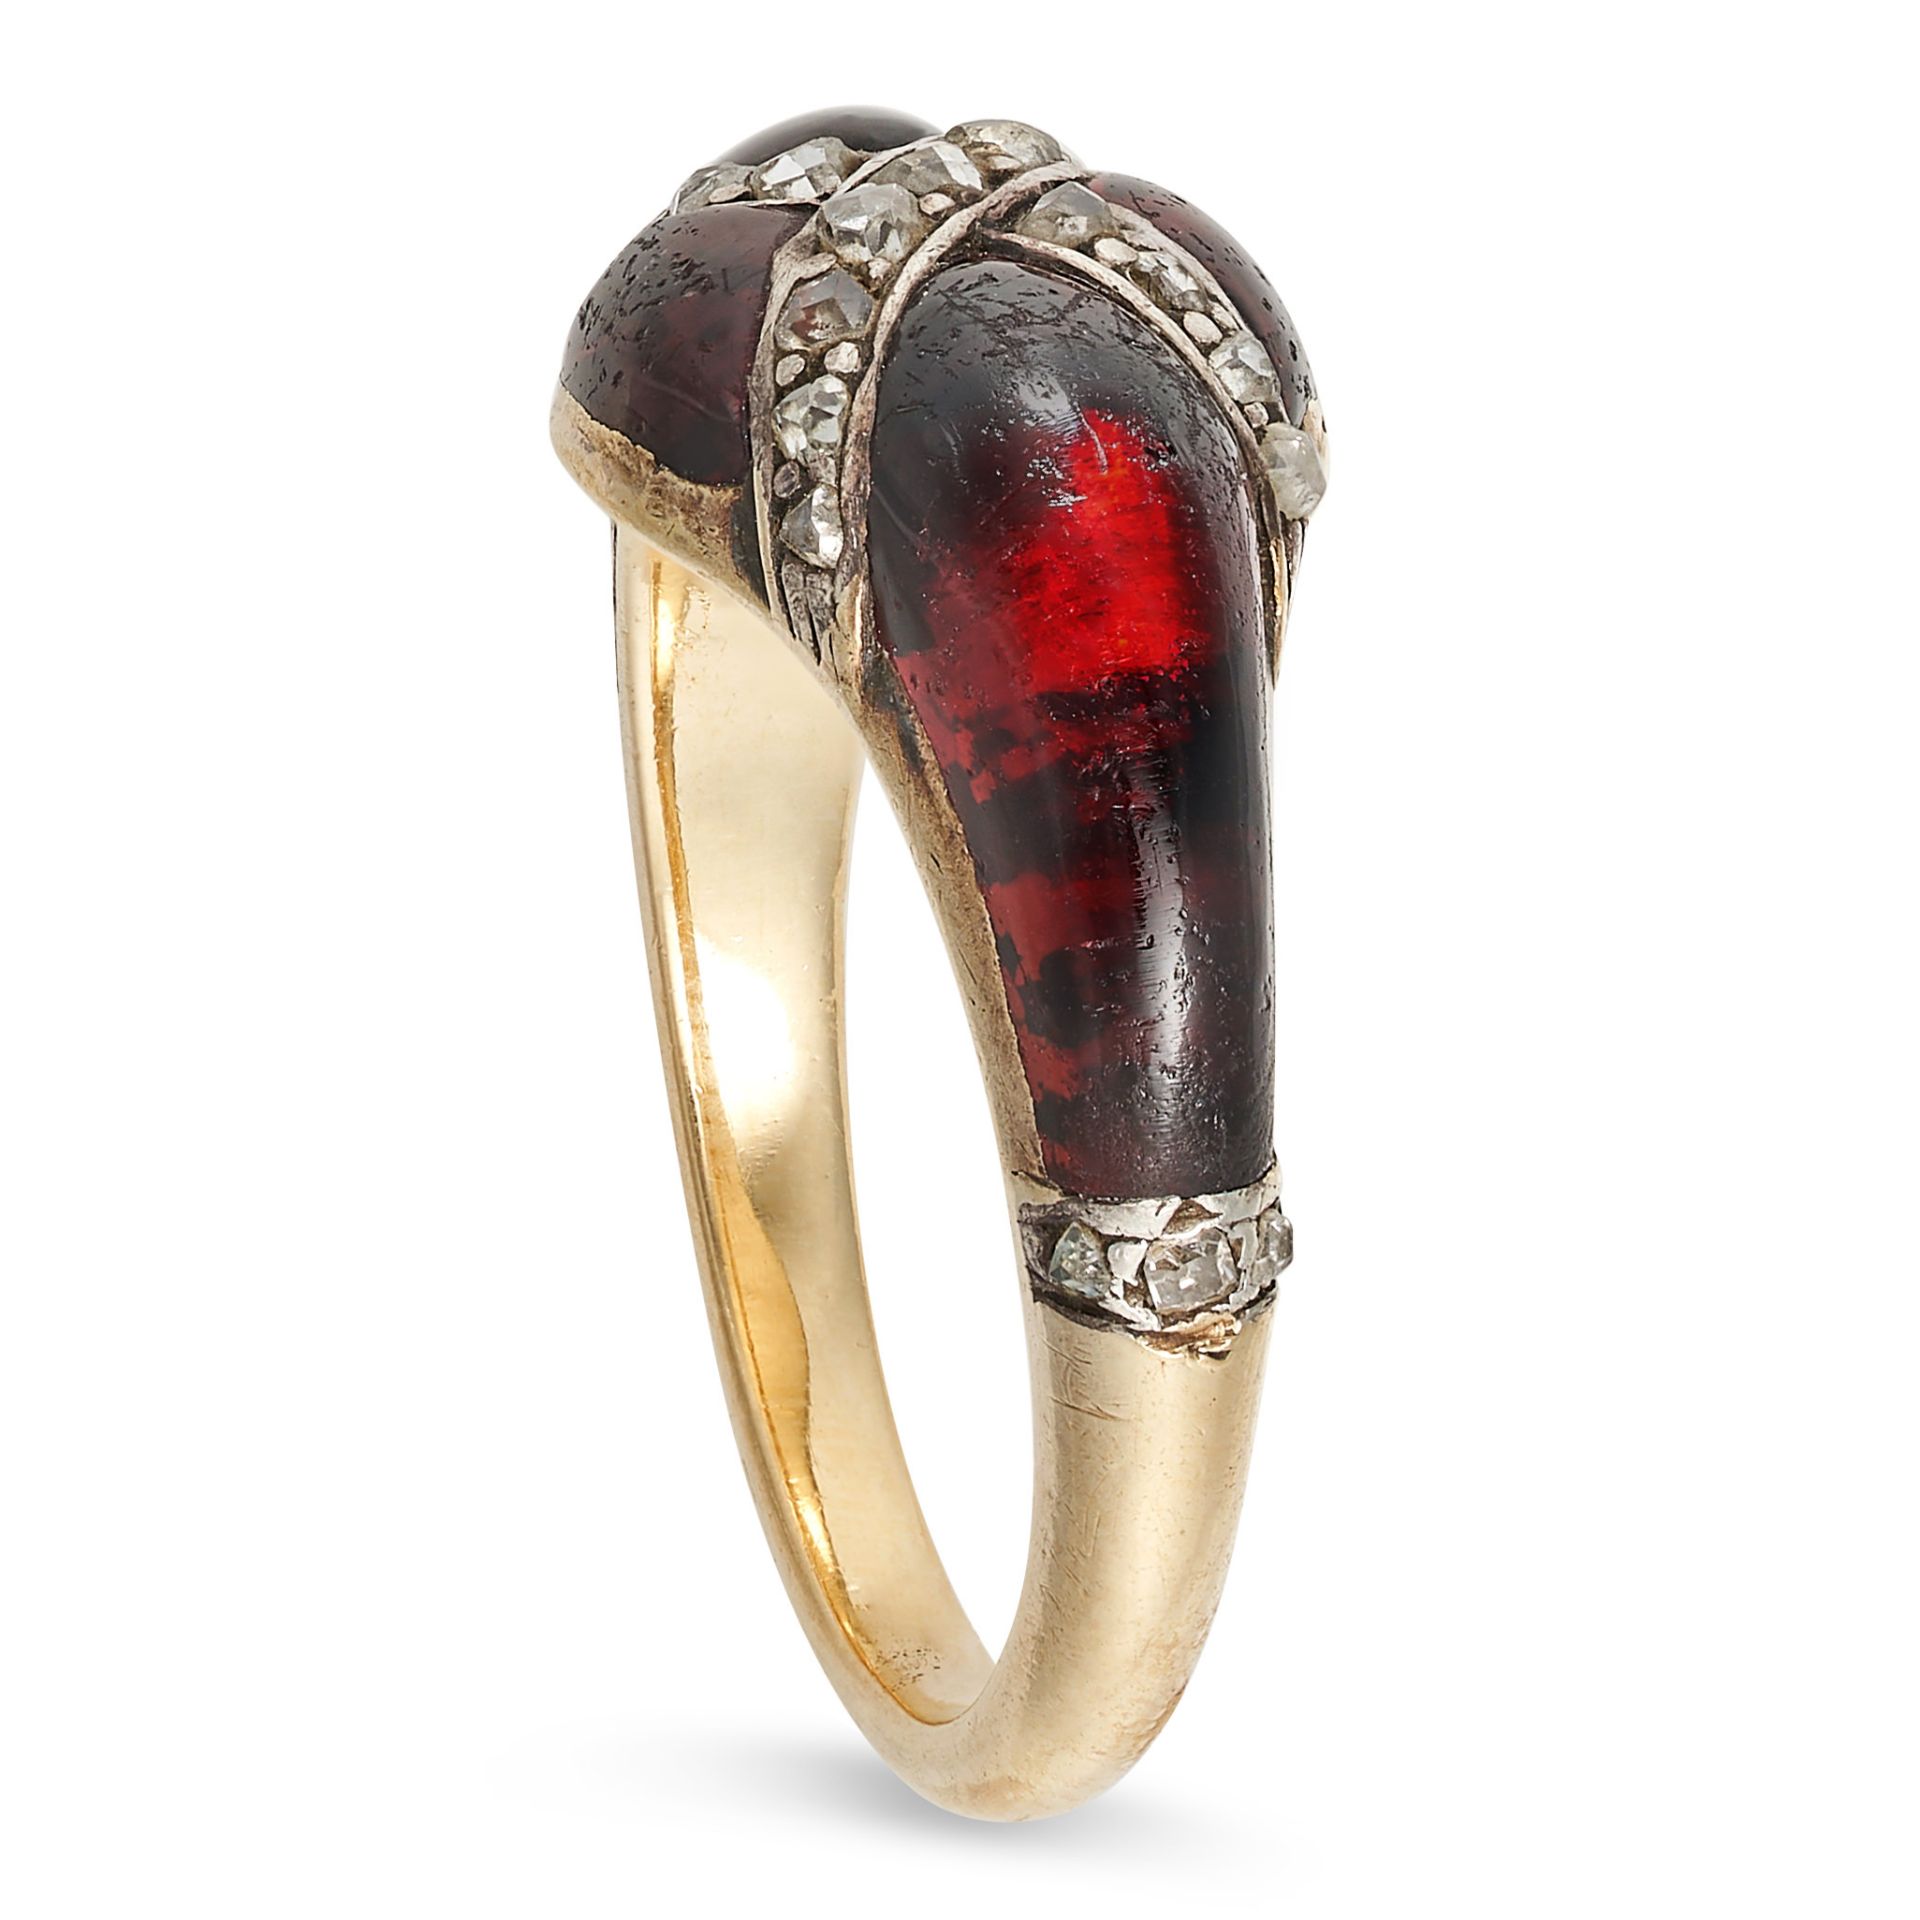 AN ANTIQUE GARNET AND DIAMOND RING in yellow gold, set with cabochon garnets accented by rows of ... - Image 2 of 2